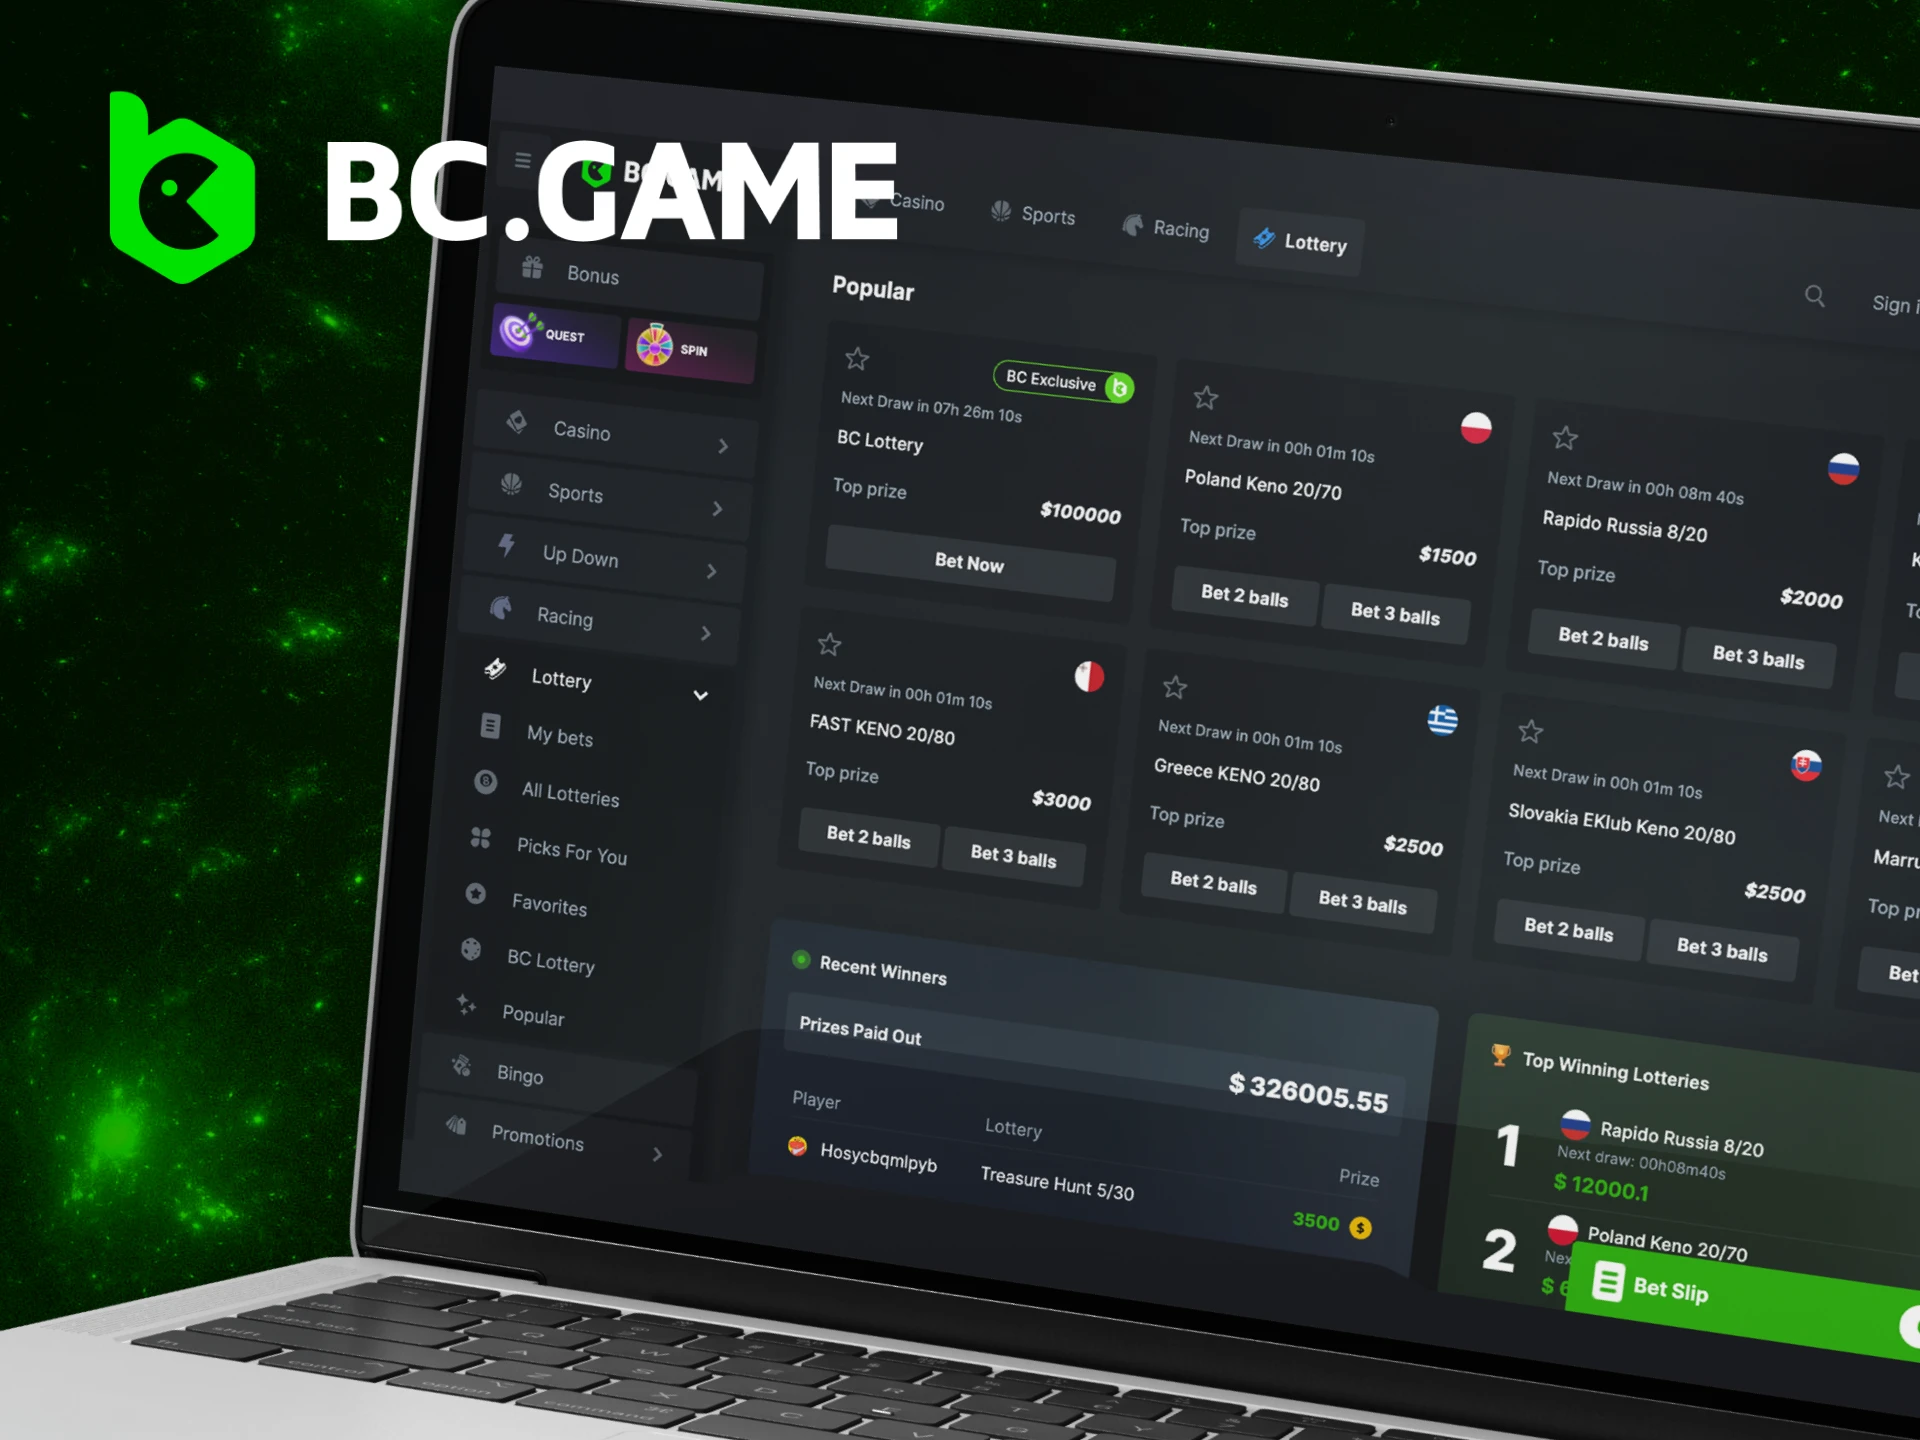 What is BC Lottery on the BC Game casino website.